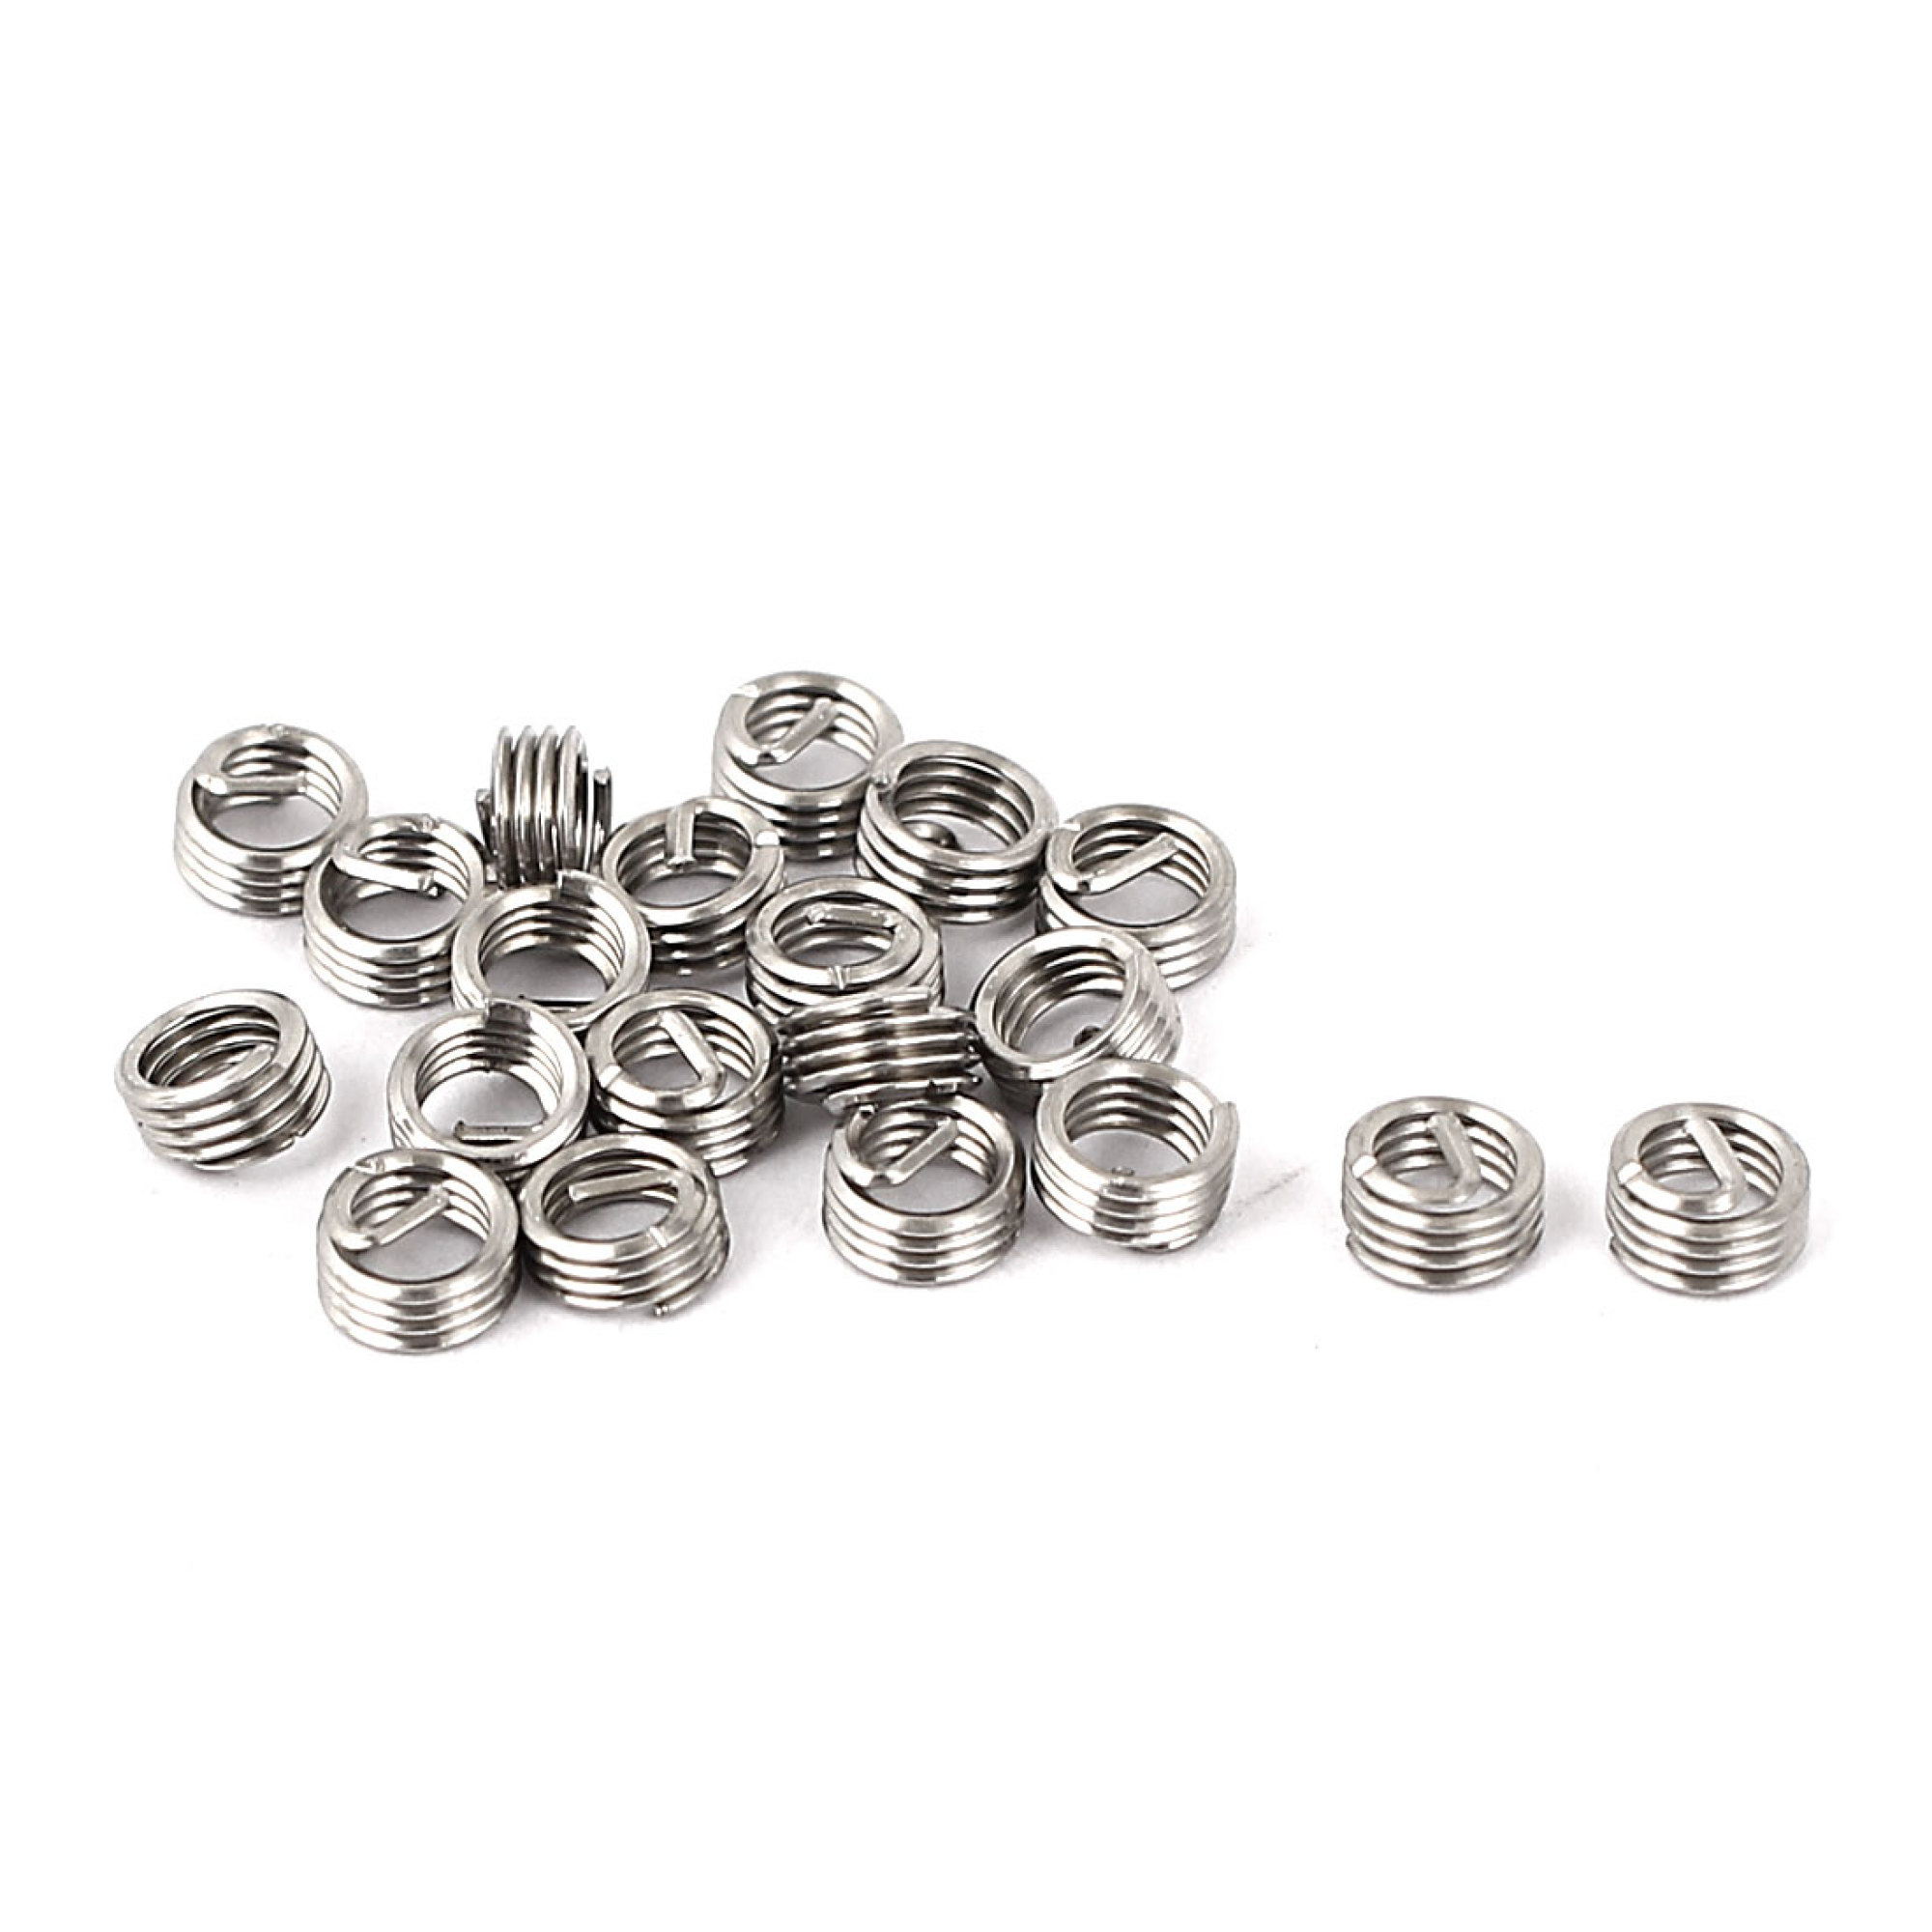 1D Stainless Steel Helicoil Wire Thread Repair Inserts 20pcs